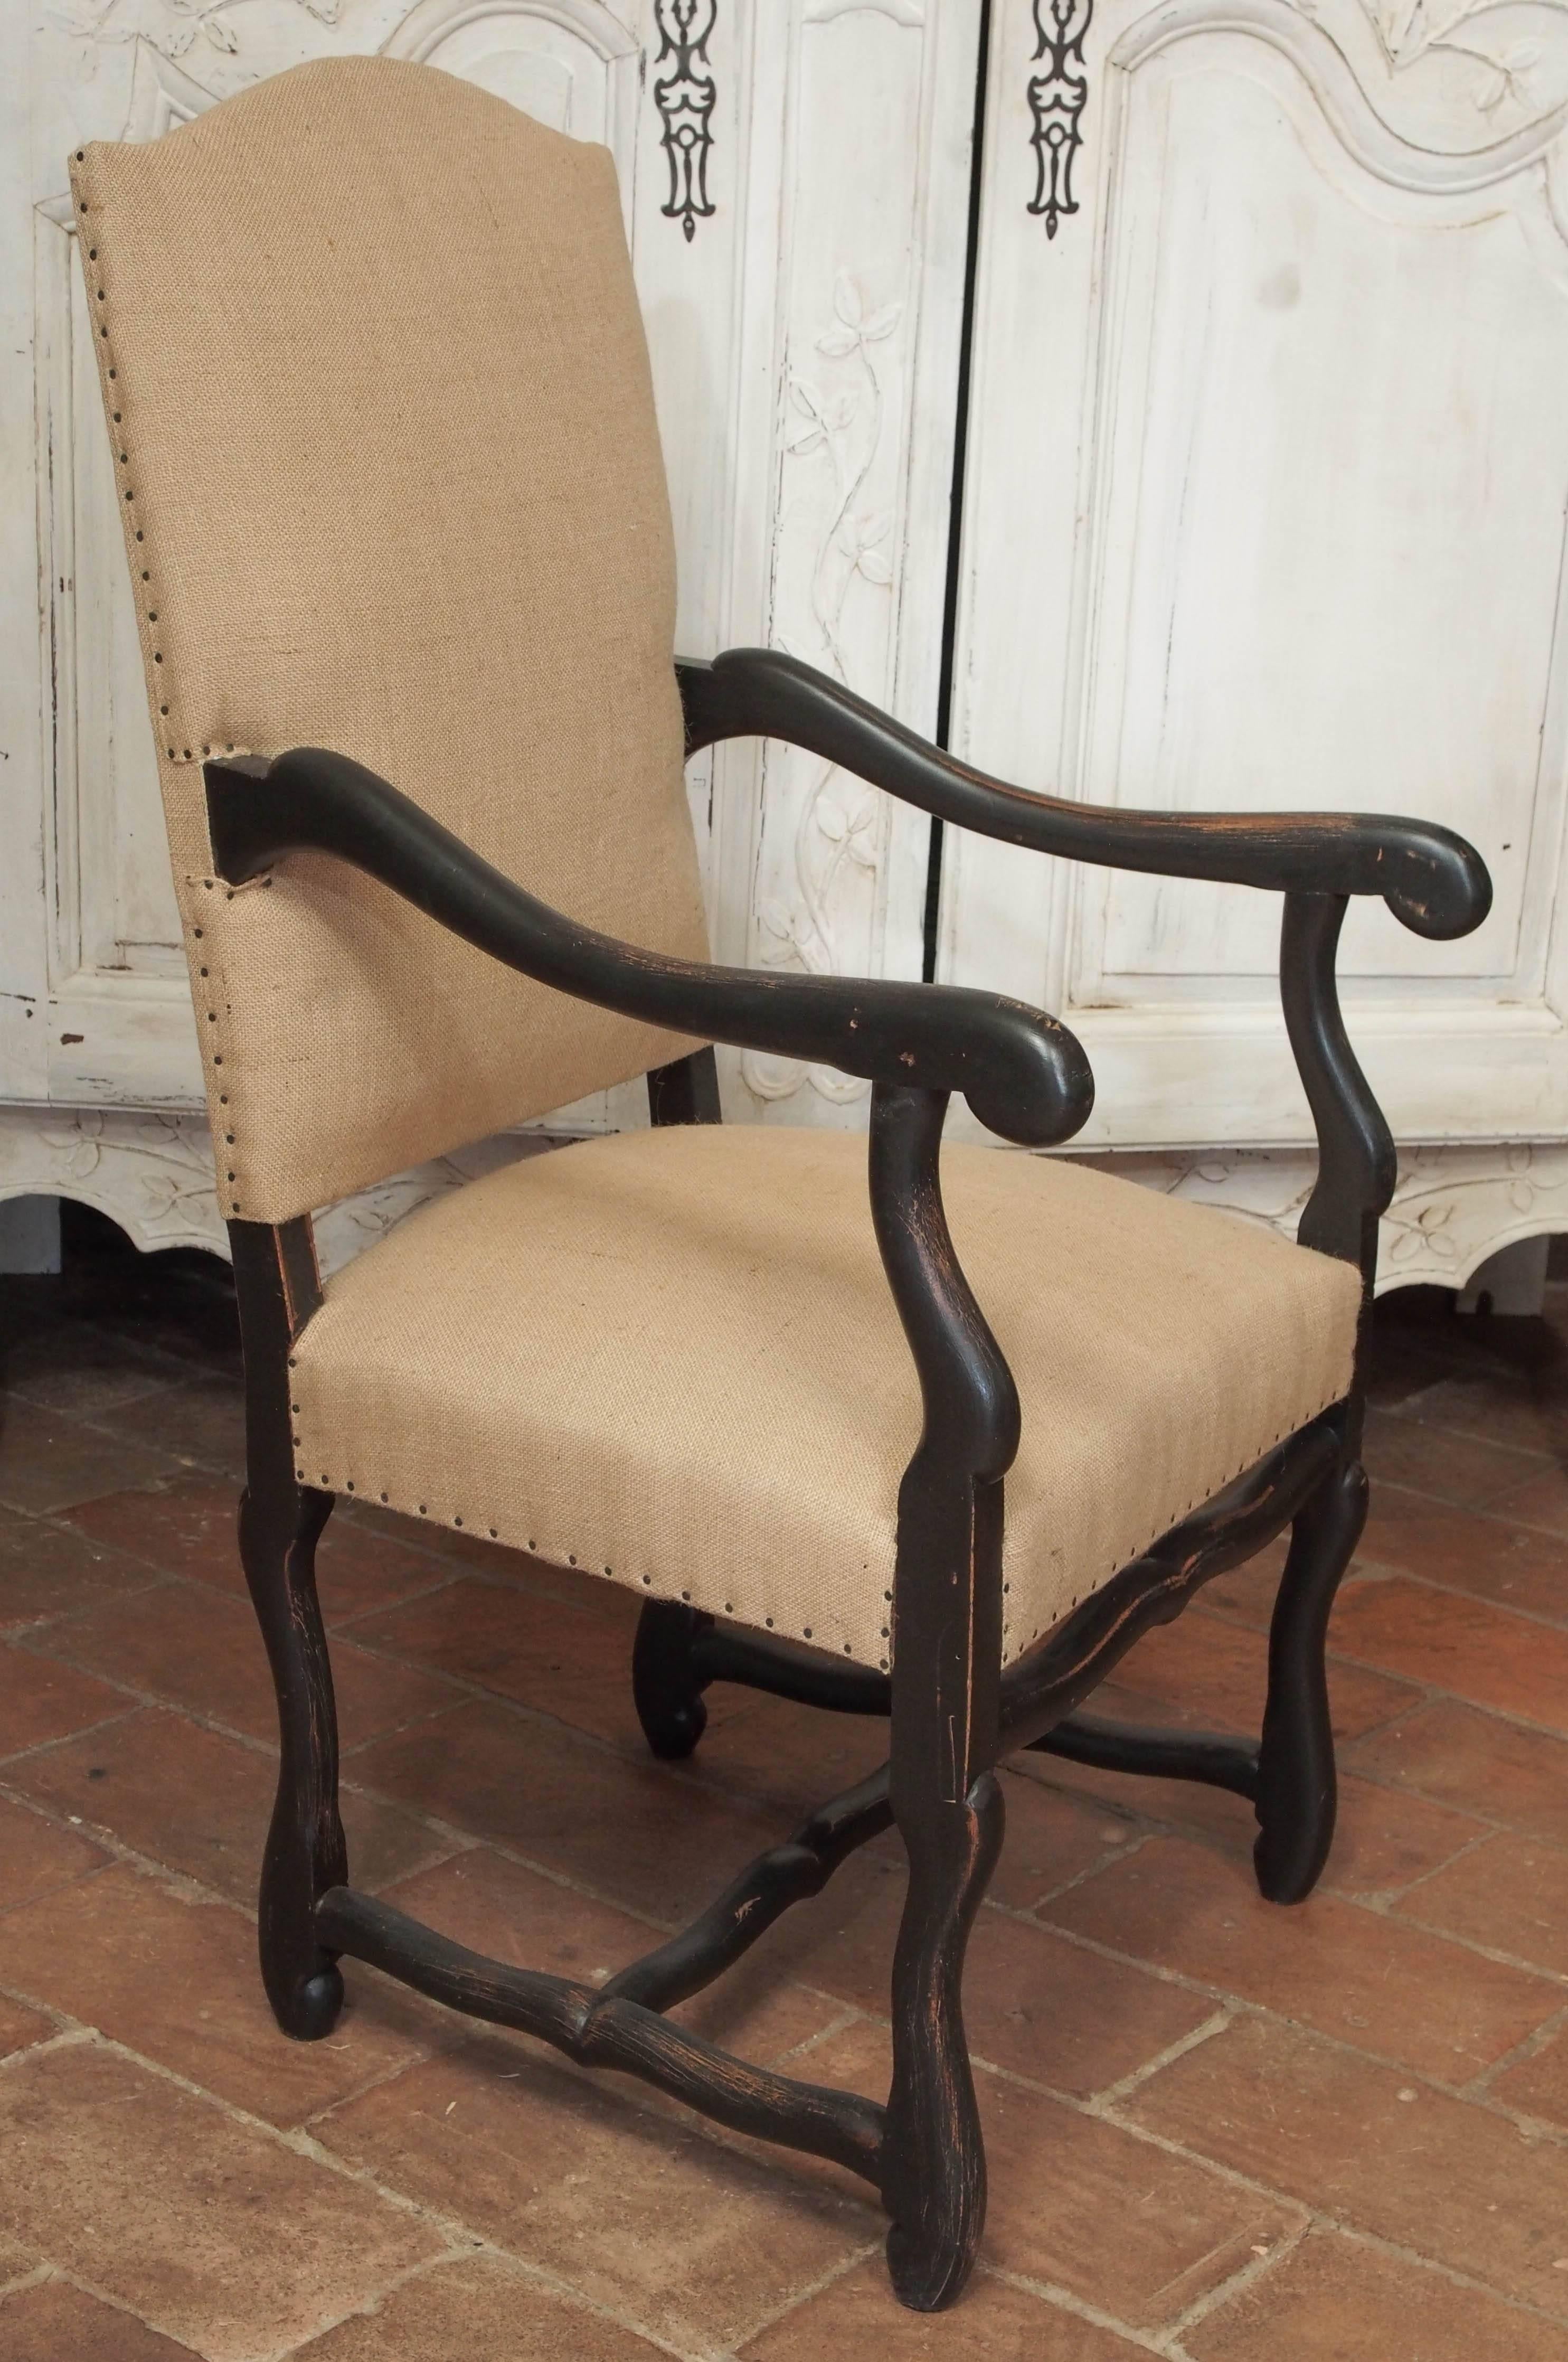 Suite of eight late 19th century painted Louis III style Os De Mouton chairs. Chairs upholstered in burlap with six sides and two armchairs, circa 1890.